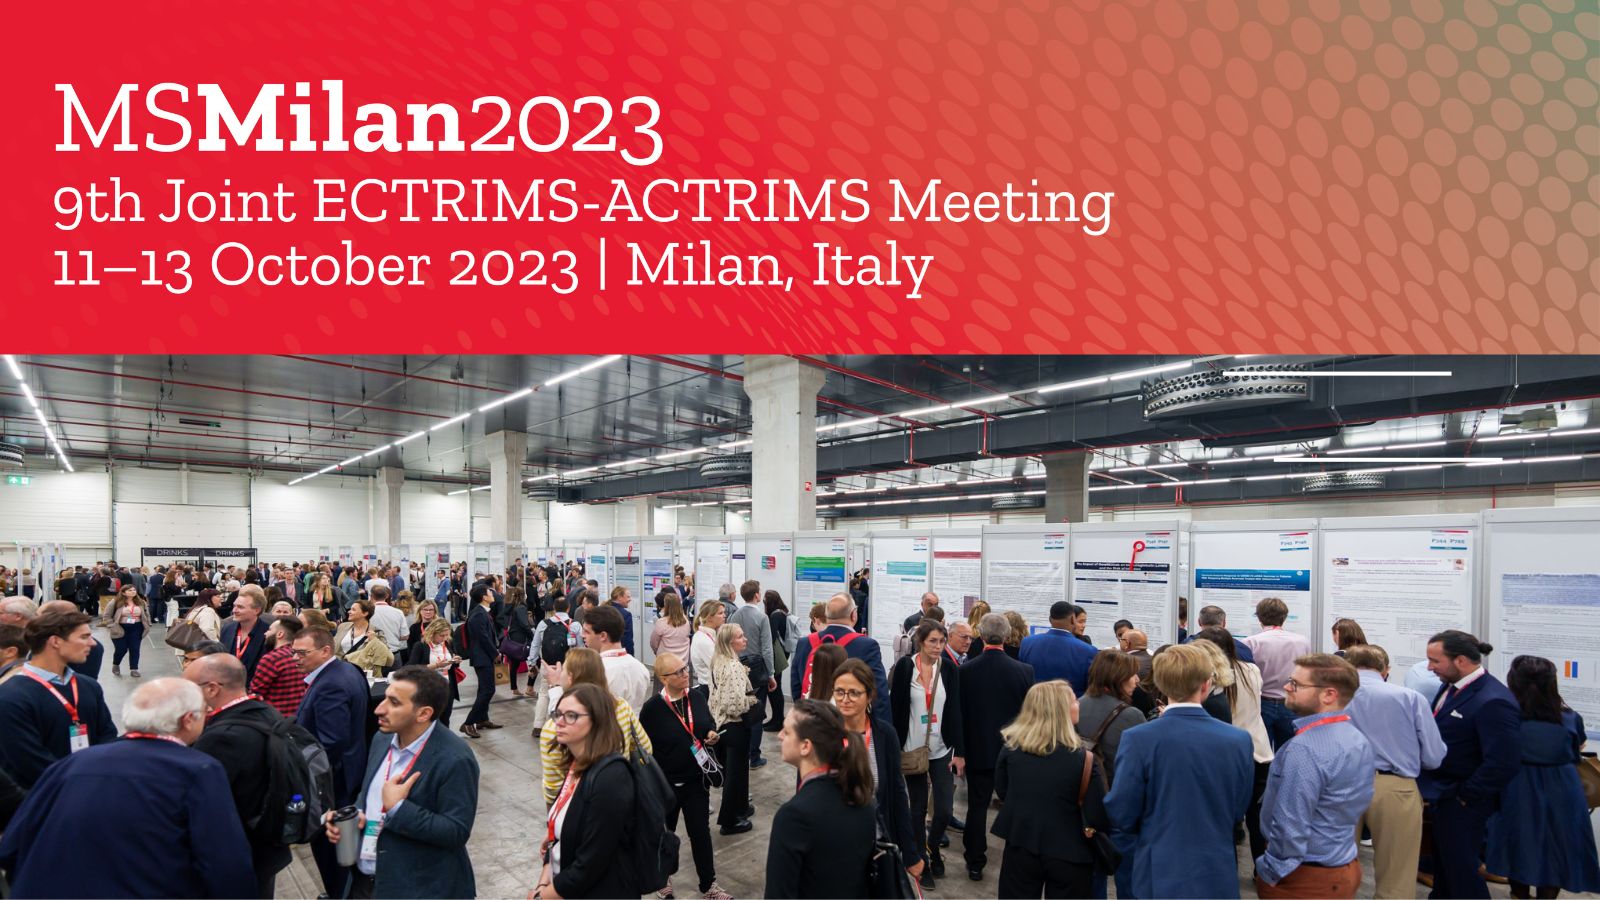 9th Joint ECTRIMSACTRIMS Meeting, MSMilan2023, Sets the Stage for